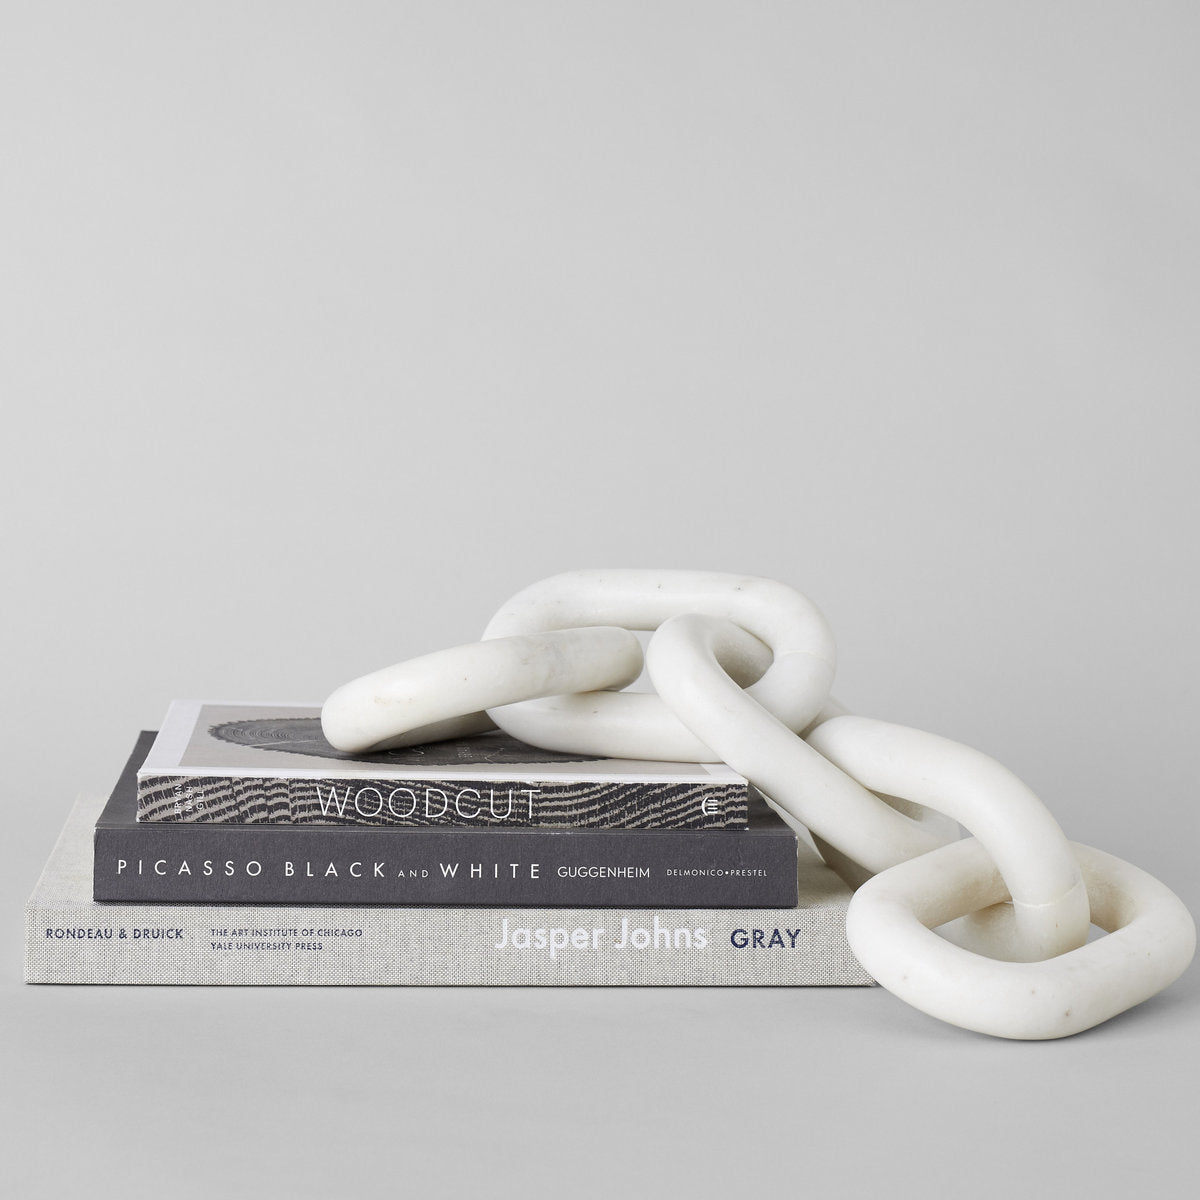 White Marble Chain, Small Link - Sweet Water Decor - Decorative Chain